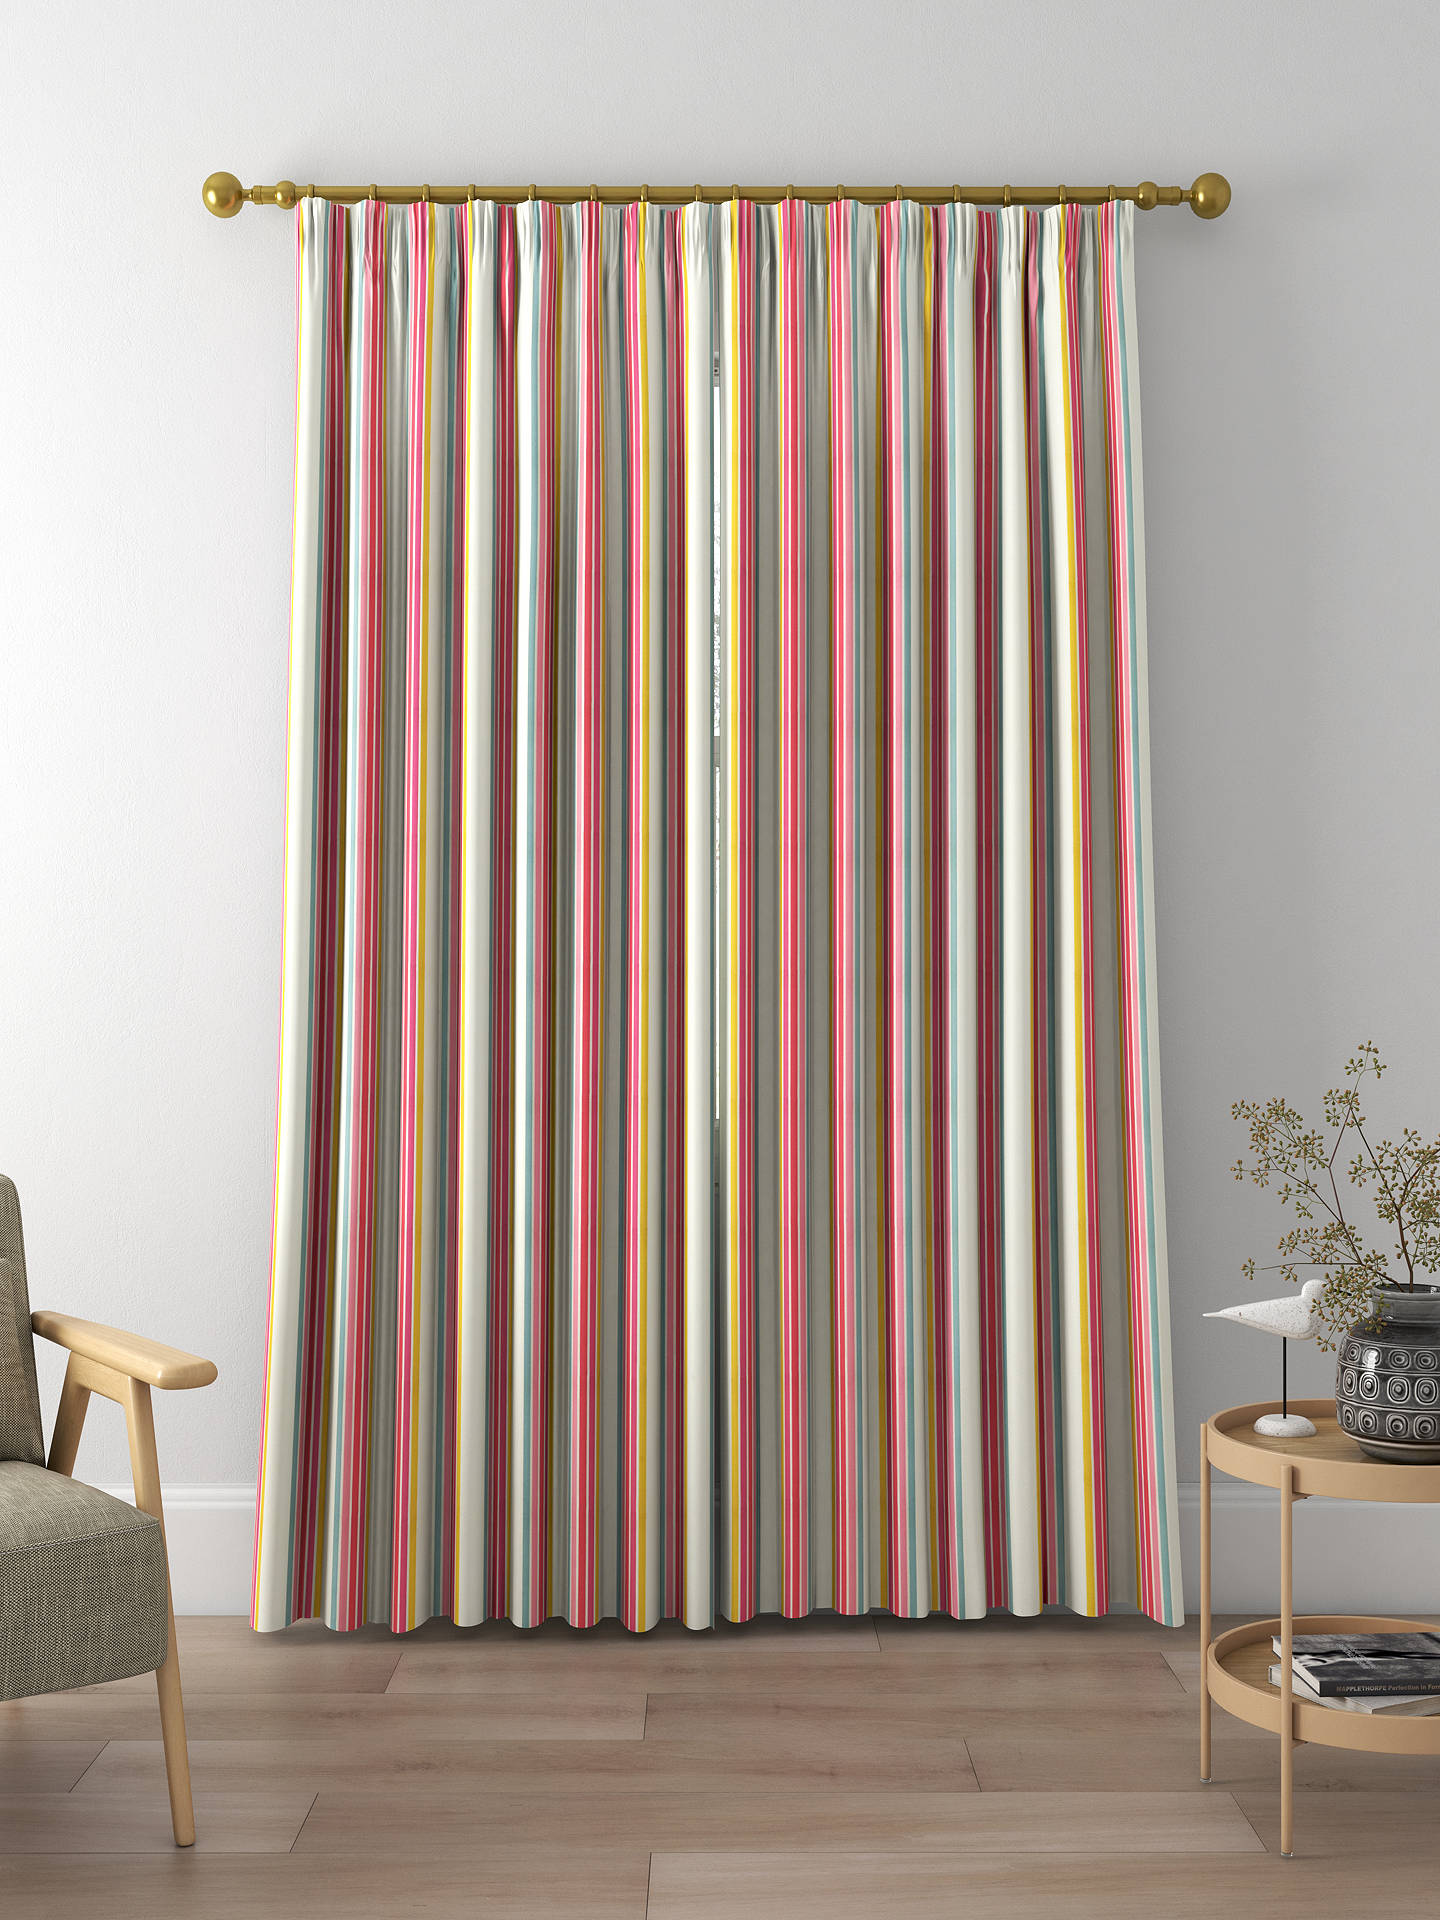 Harlequin Helter Skelter Stripe Made to Measure Curtains and Roman Blind, Cherry/Blossom